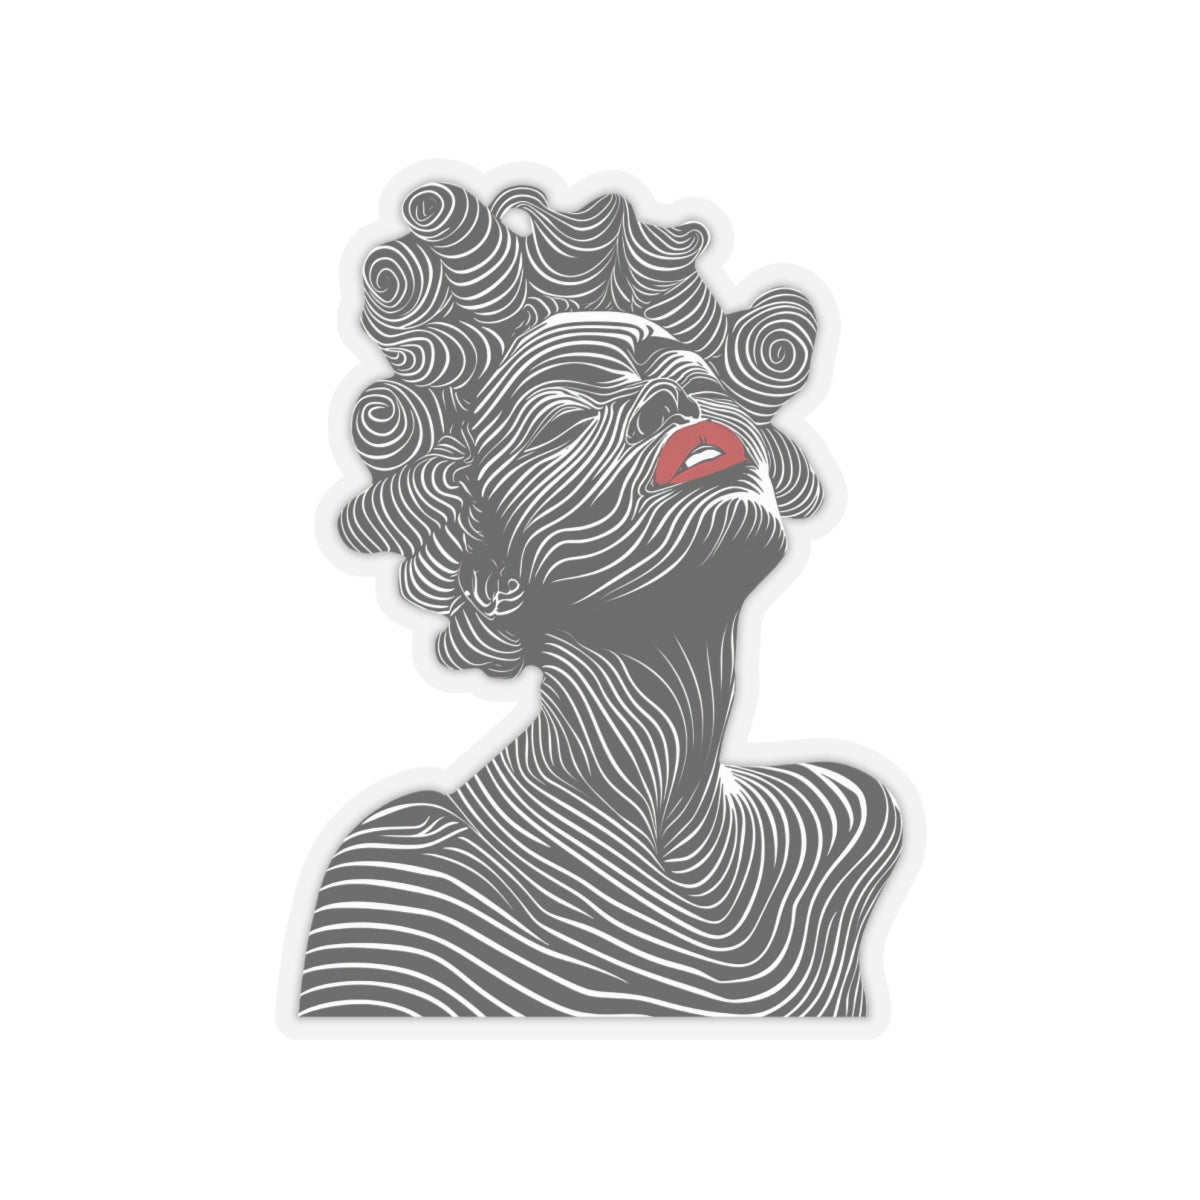 Transparent Bantu Knots Sticker captures the beauty of a black woman adorned in her cultural crown of hair, her lips painted in a vibrant shade of red. 